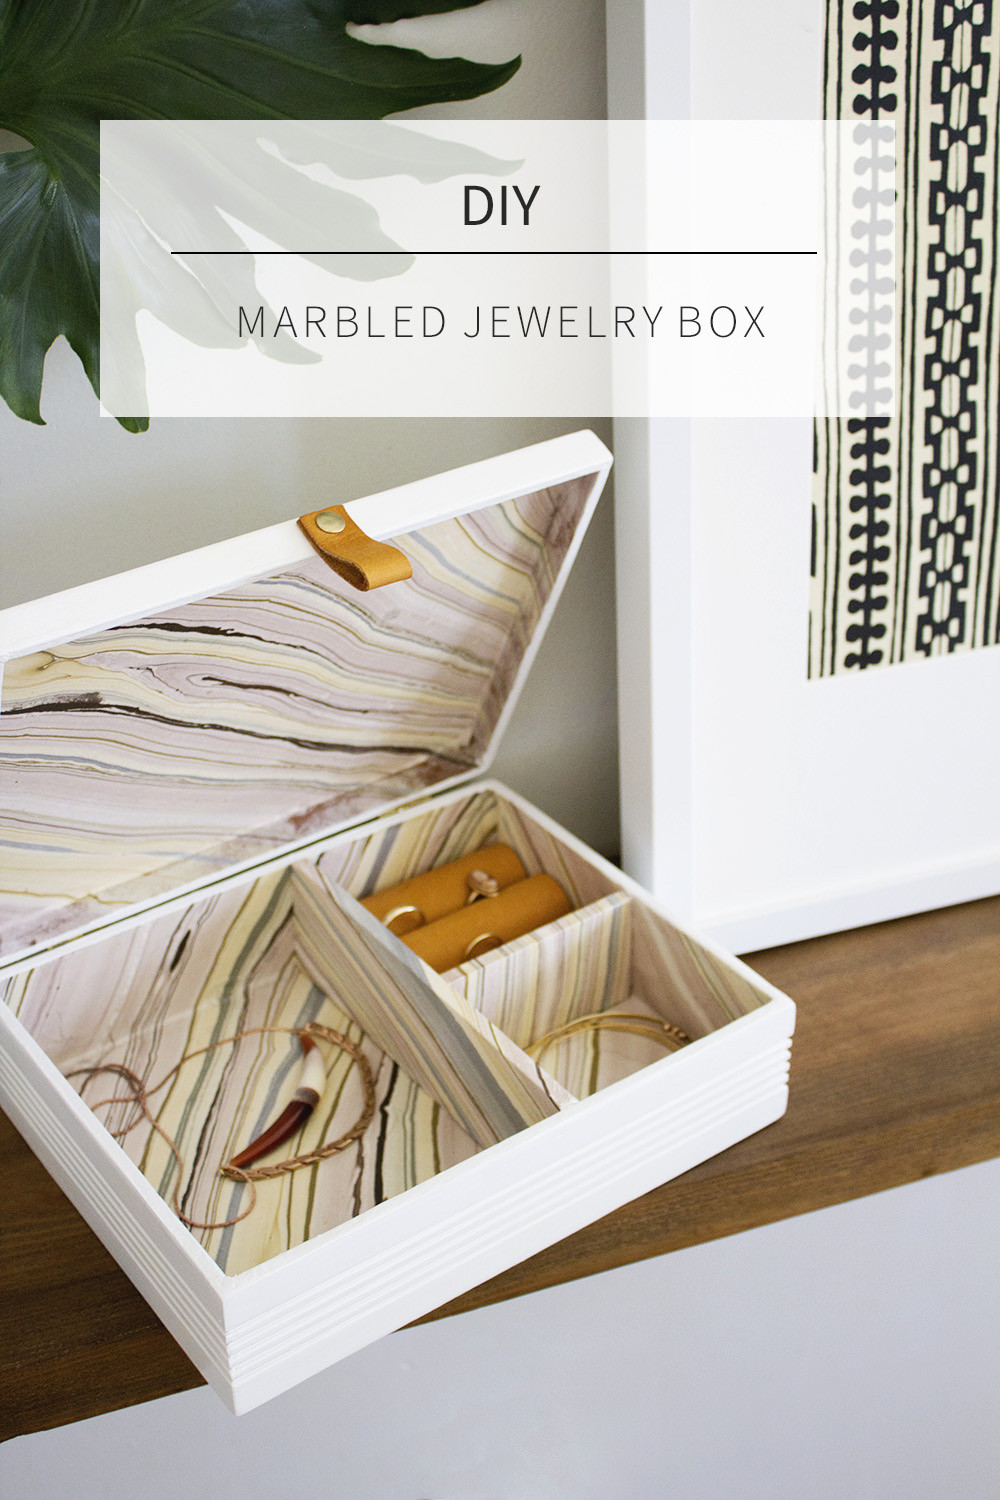 DIY Jewelry Box
 How to Make A Jewelry Box from a Cigar Box